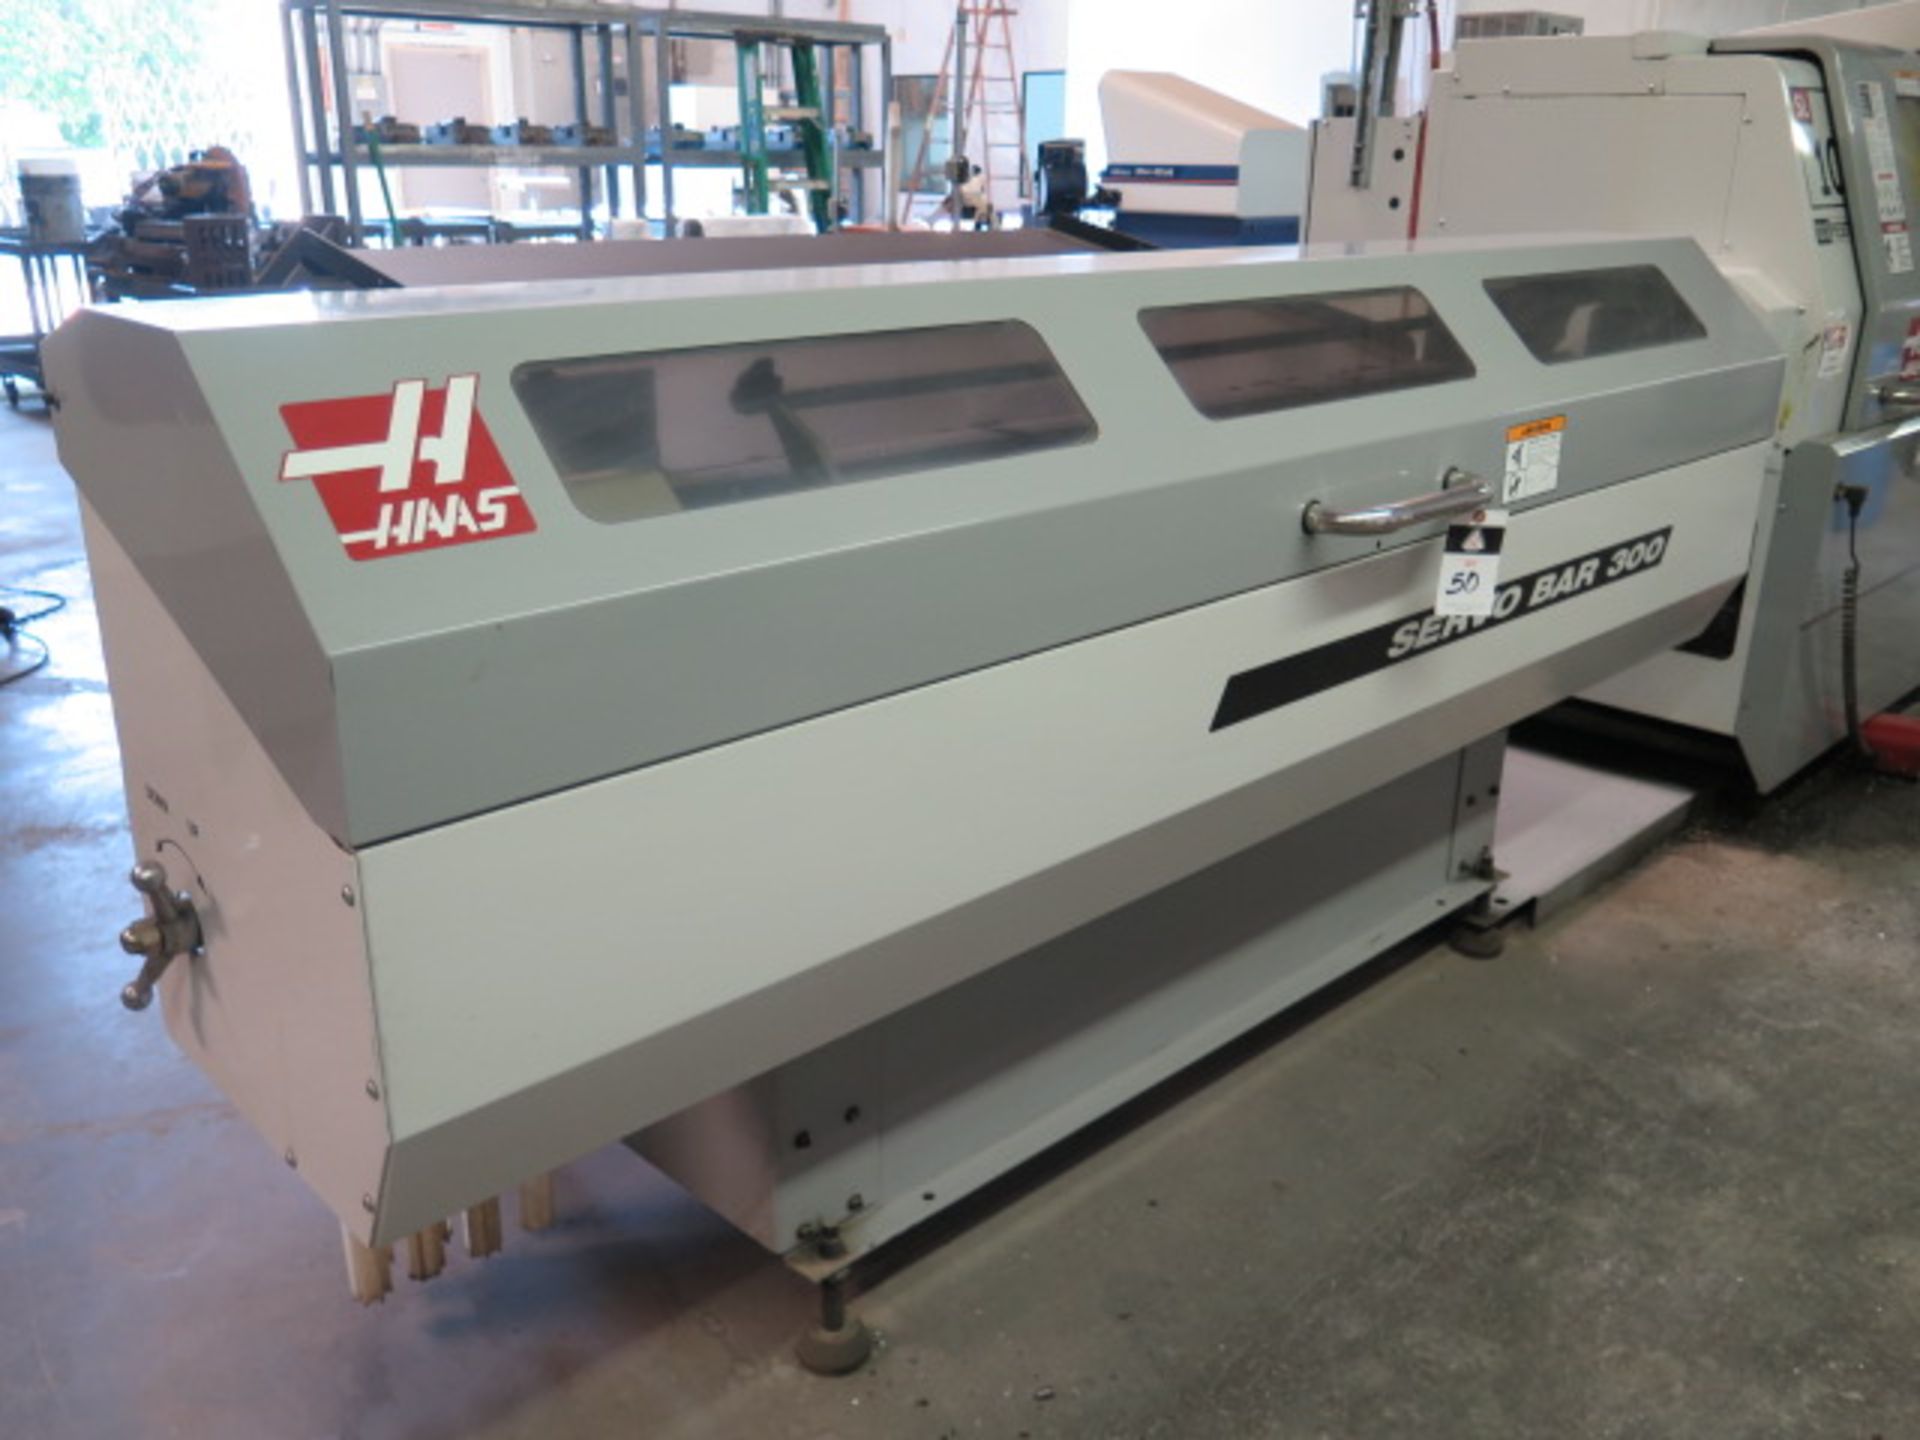 Haas Servobar 300 Automatic Bar Loader / Feeder s/n 92046 w/ Spindle Liner Set (SOLD AS-IS - NO WARR - Image 3 of 11